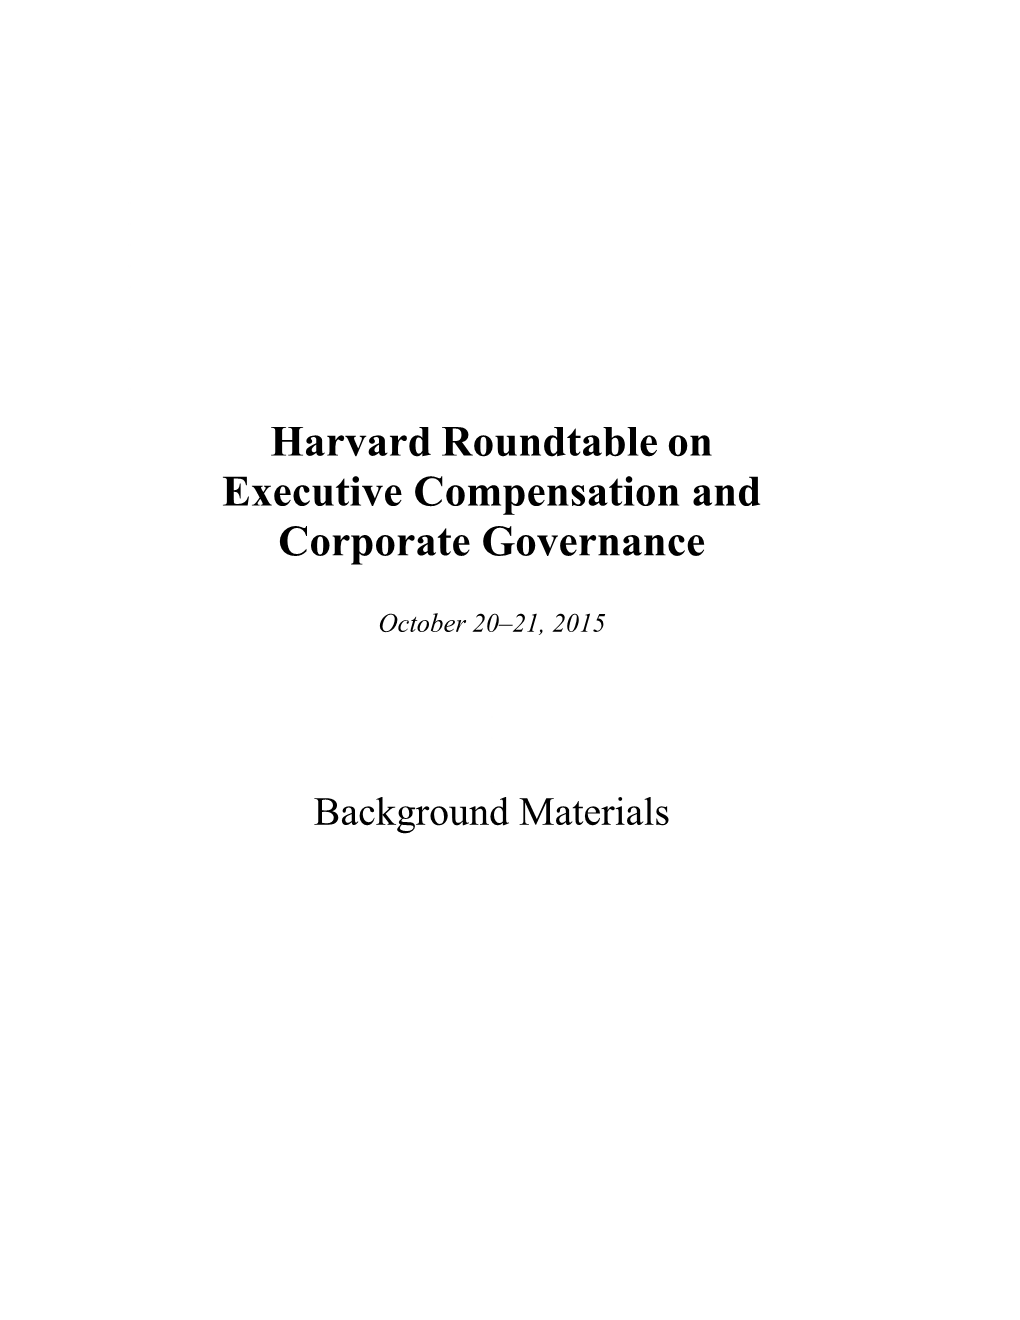 Harvard Roundtable on Executive Compensation and Corporate Governance